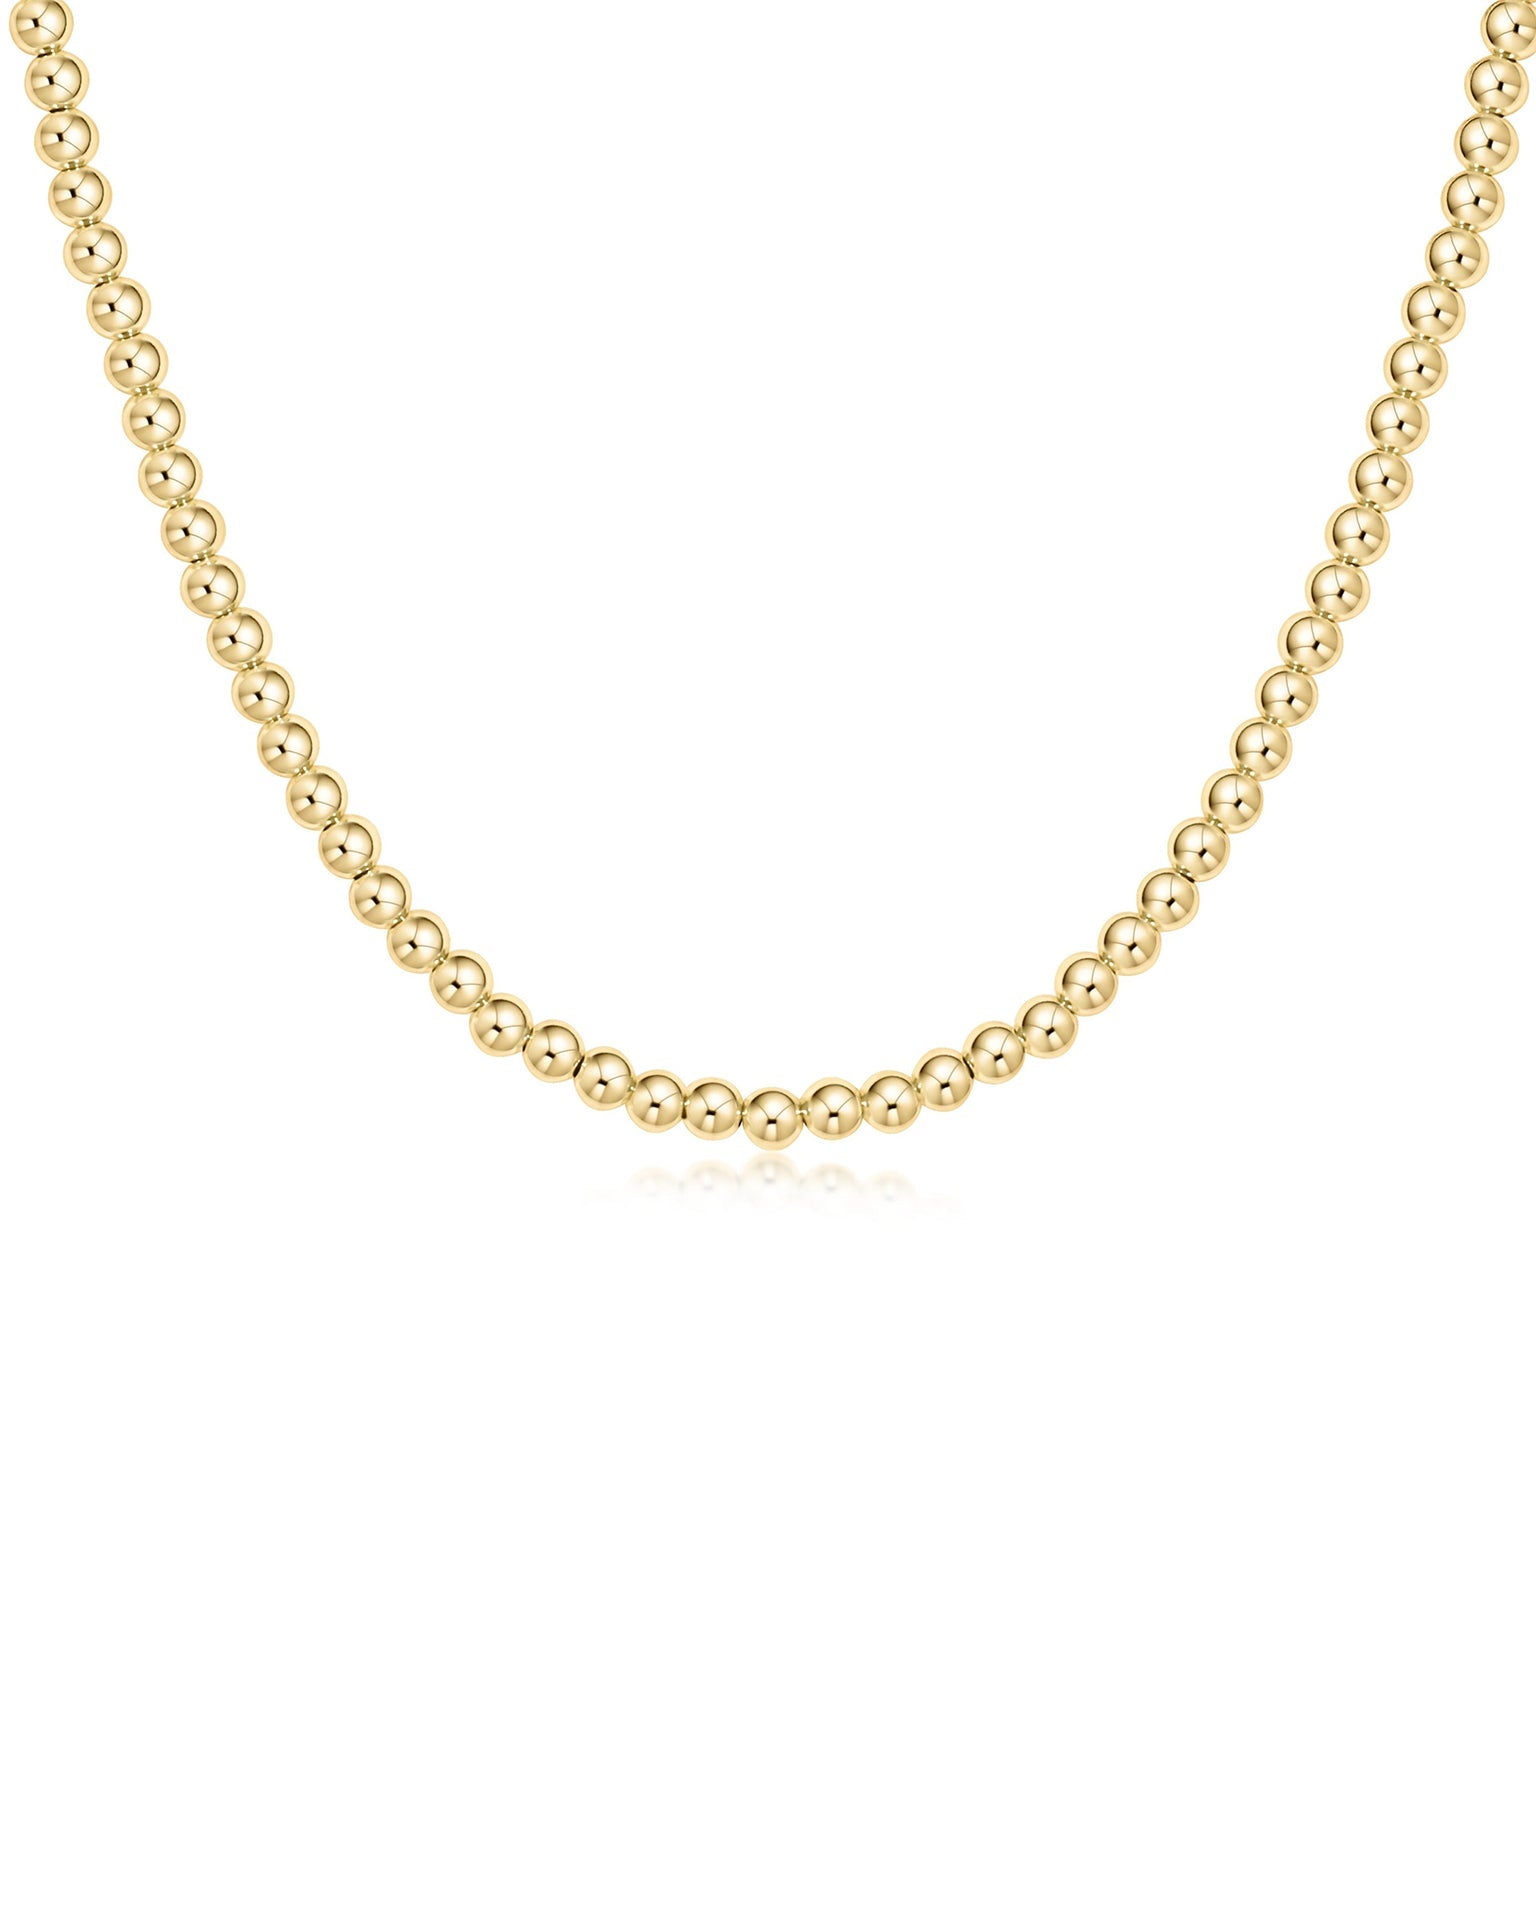 15" Choker Classic Gold 4mm Bead Necklace